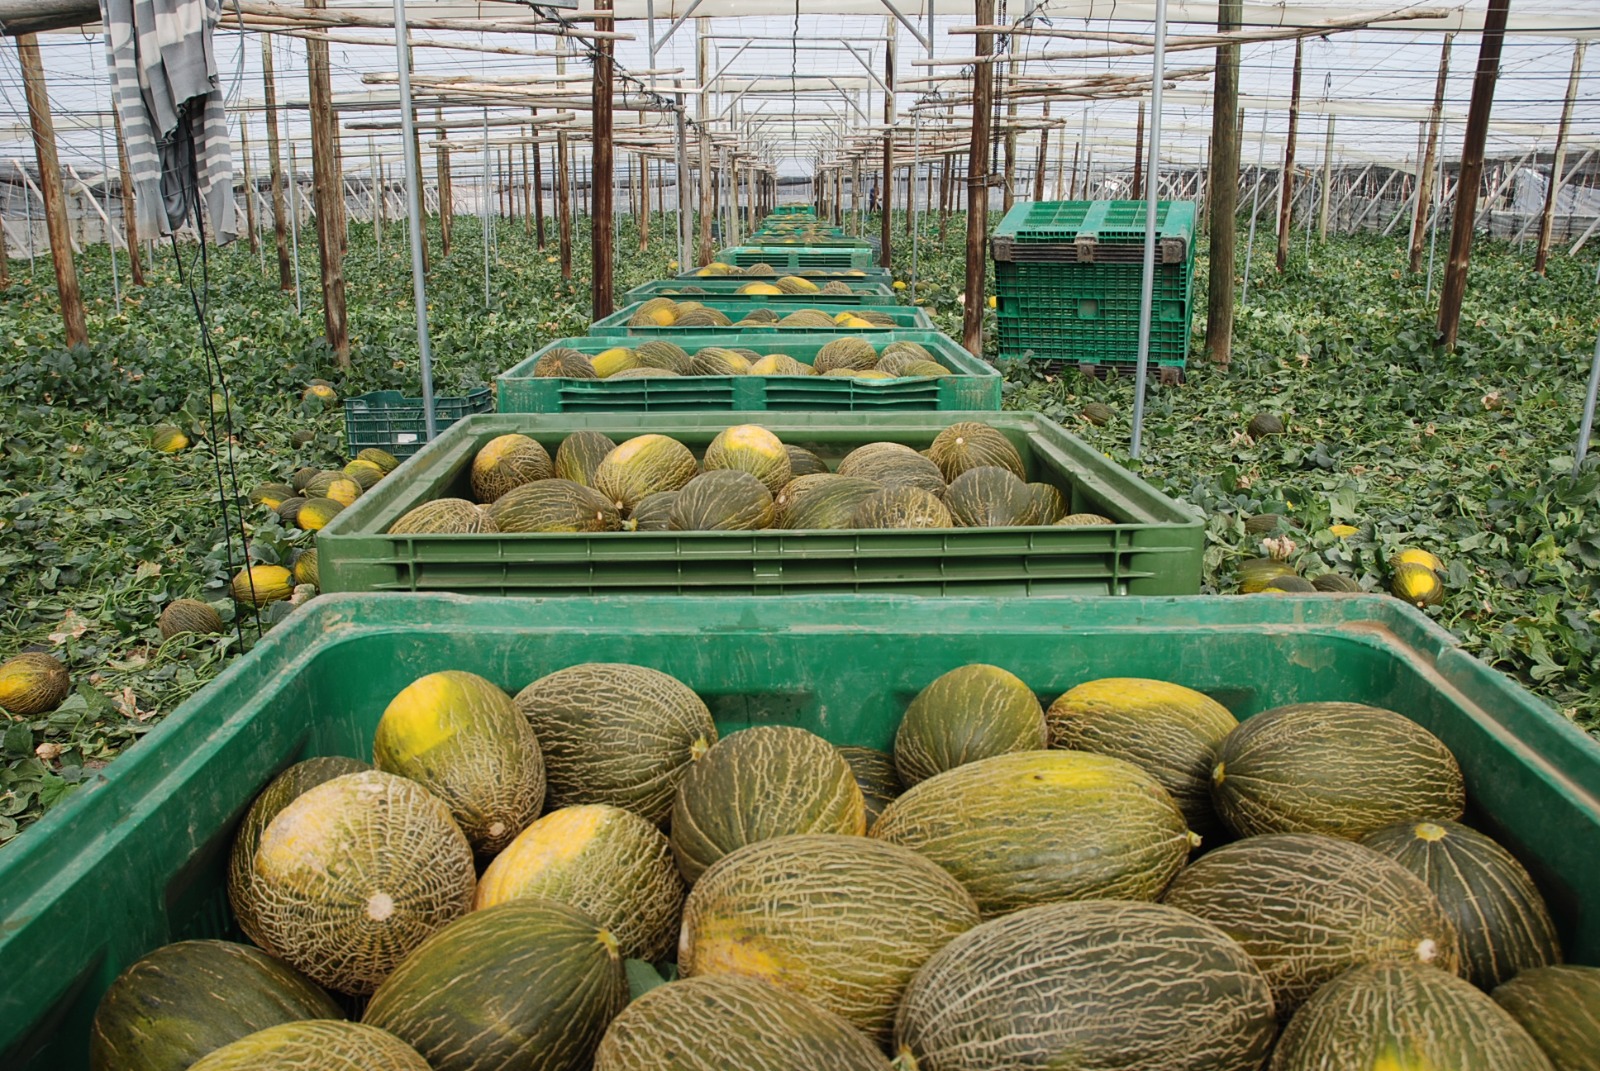 Spain, Morocco and Italy remain key EU watermelon suppliers